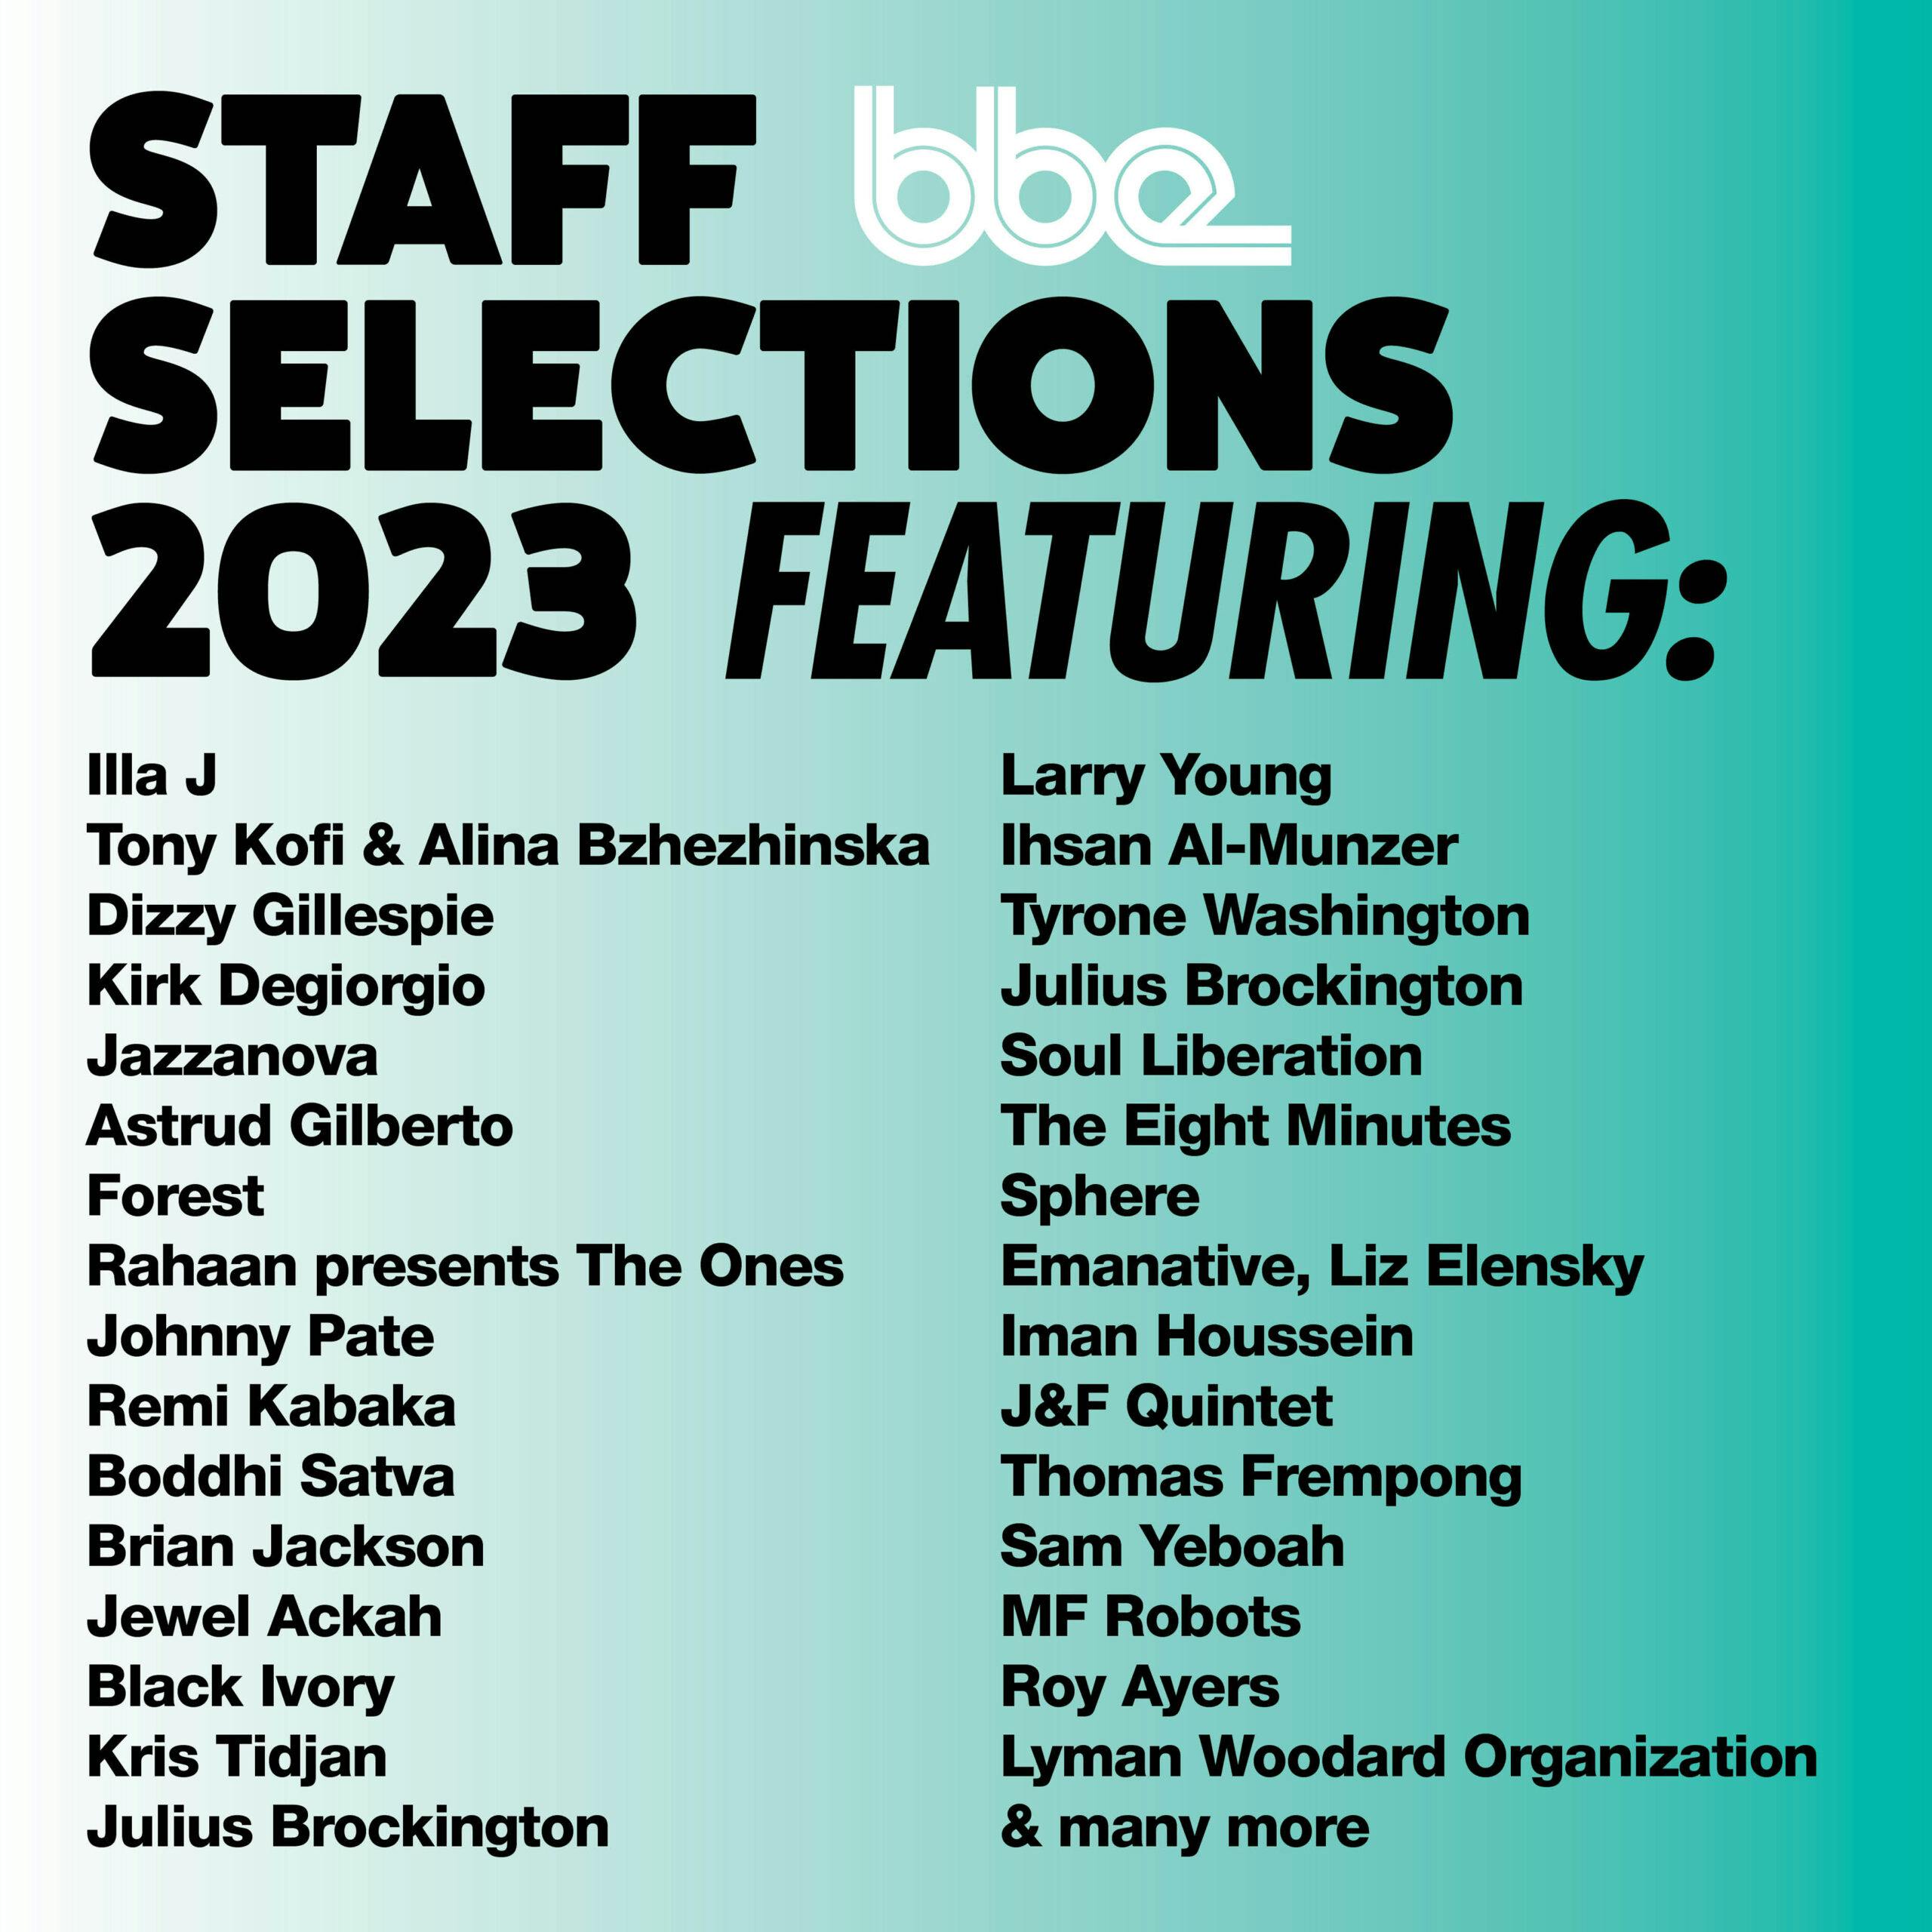 2023 has certainly kept us on our toes at BBE Music, with no shortage of exciting happenings. Releasing more than 100 projects this year, we're thrilled to highlight our team's favorite musical selections.